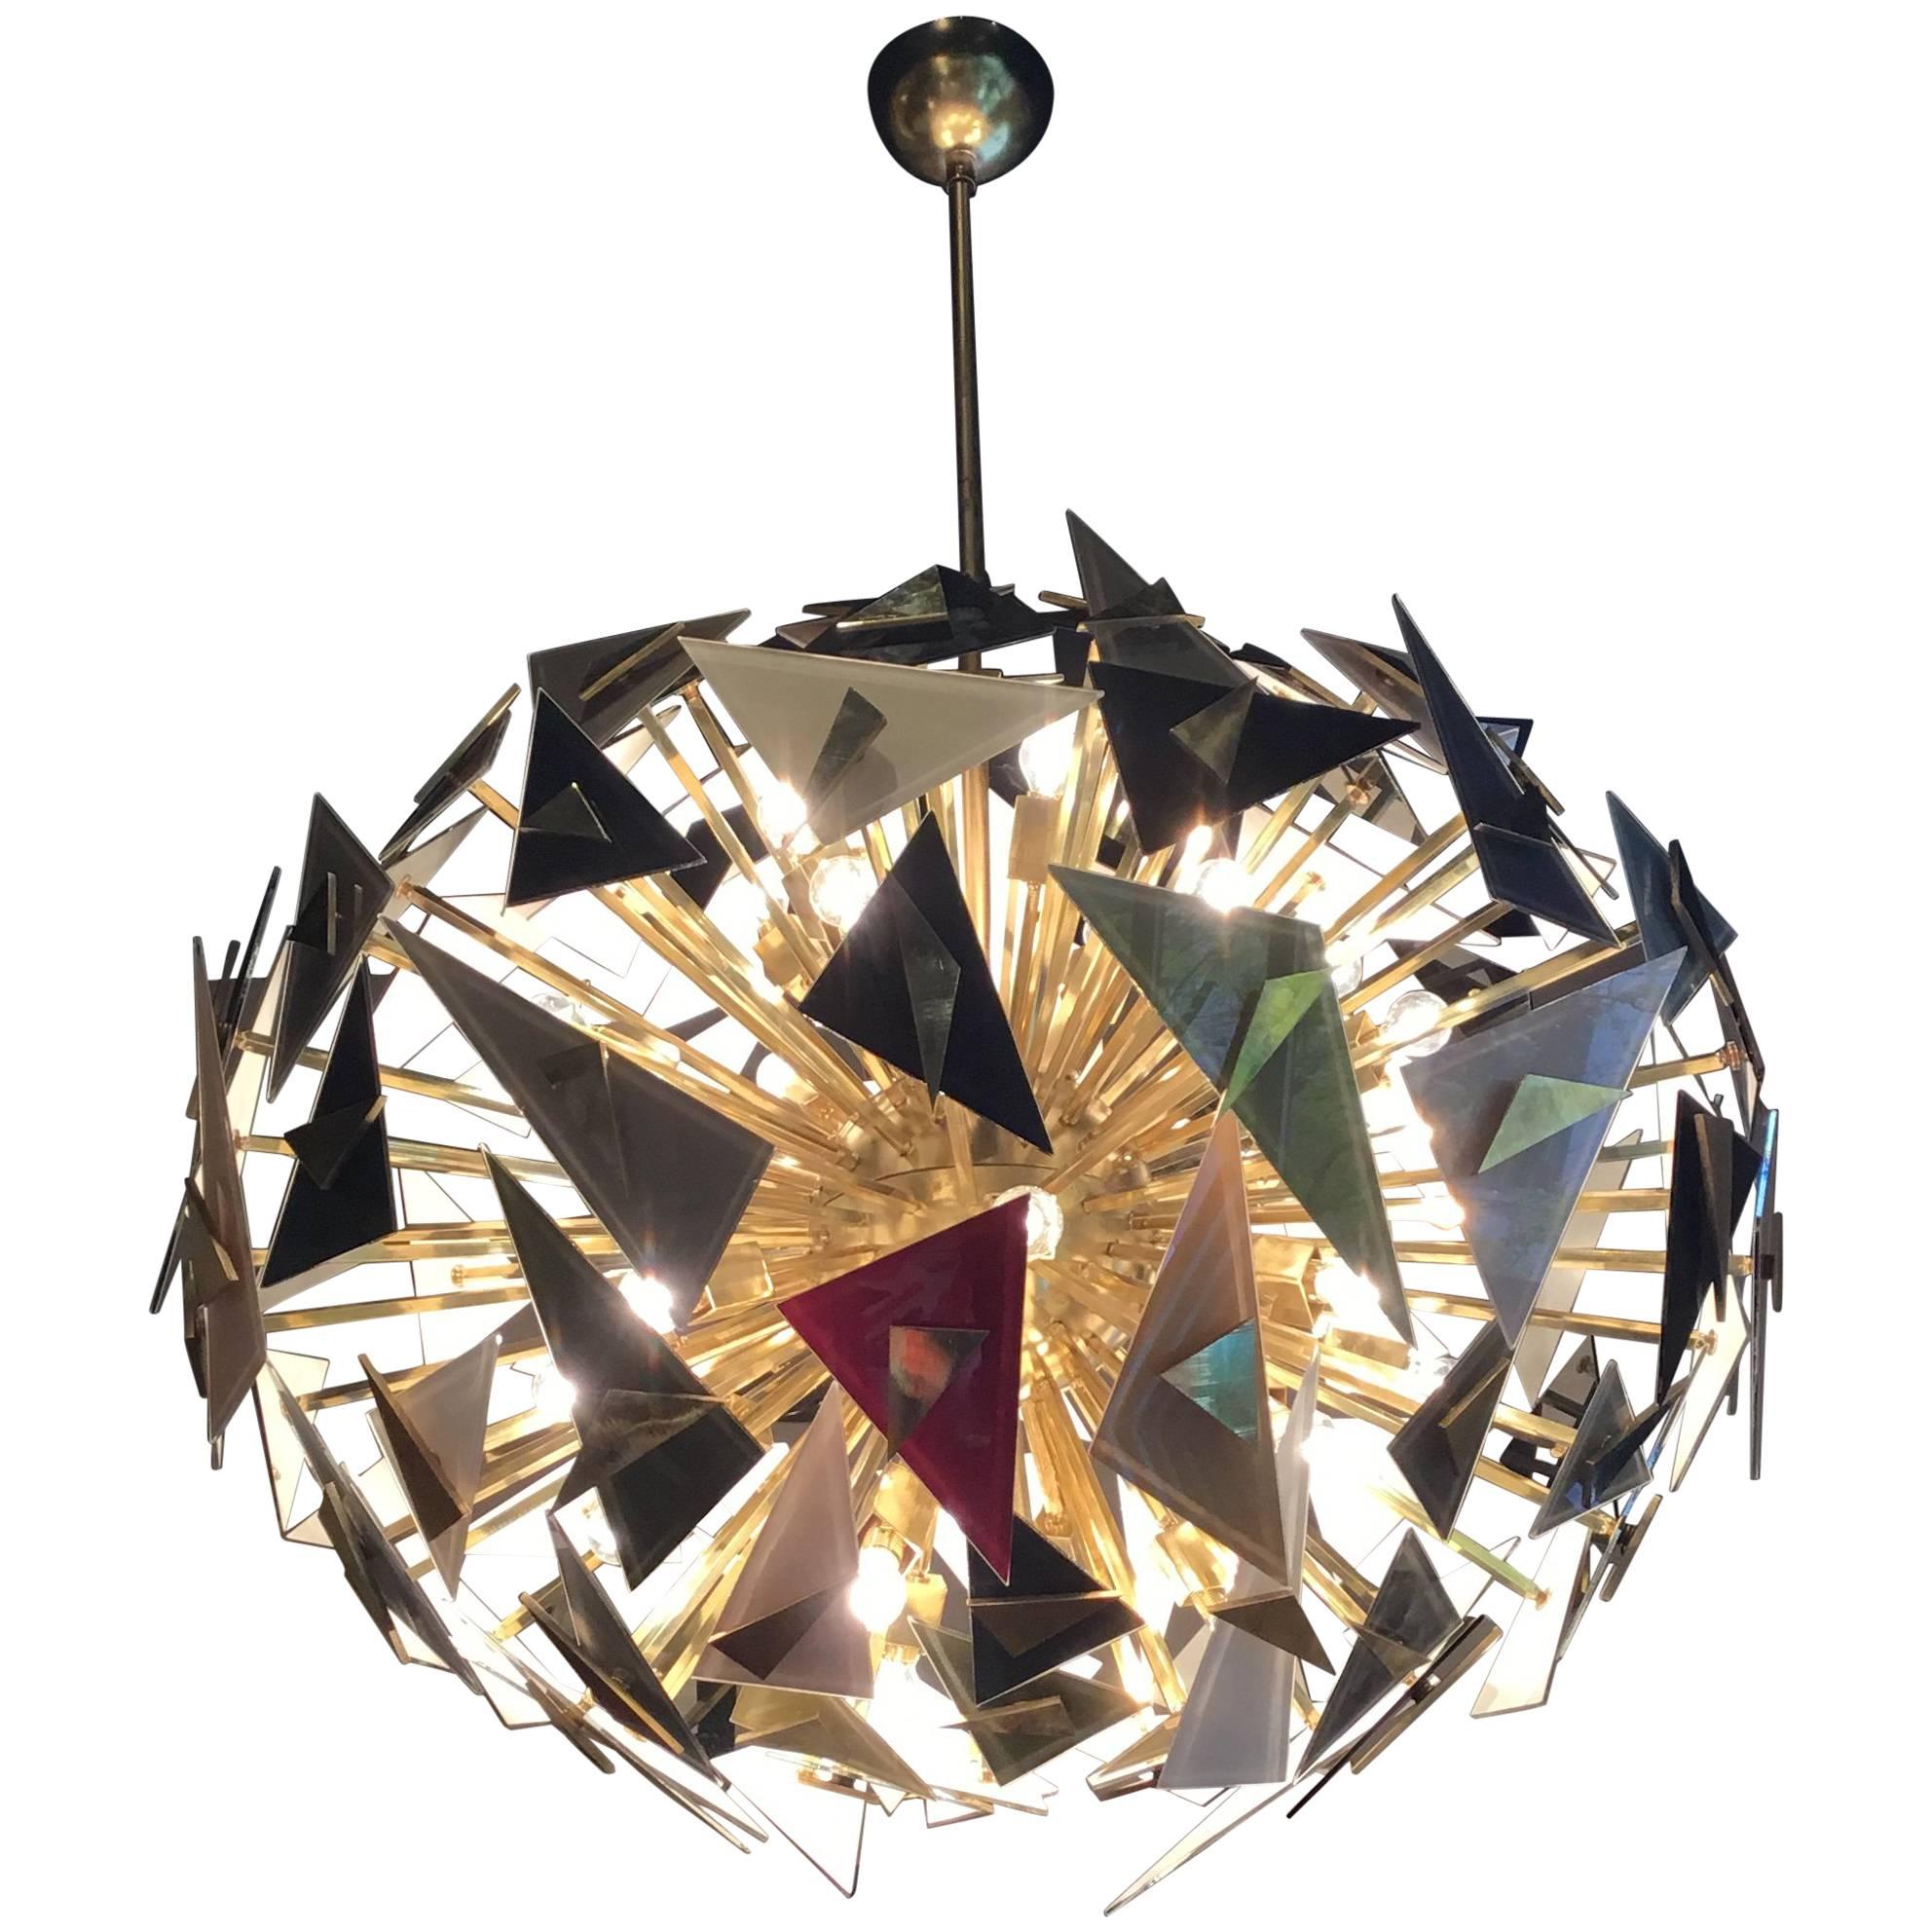 Important Vintage handcraft Chandelier, Made in Italy, 1990s glass triangles